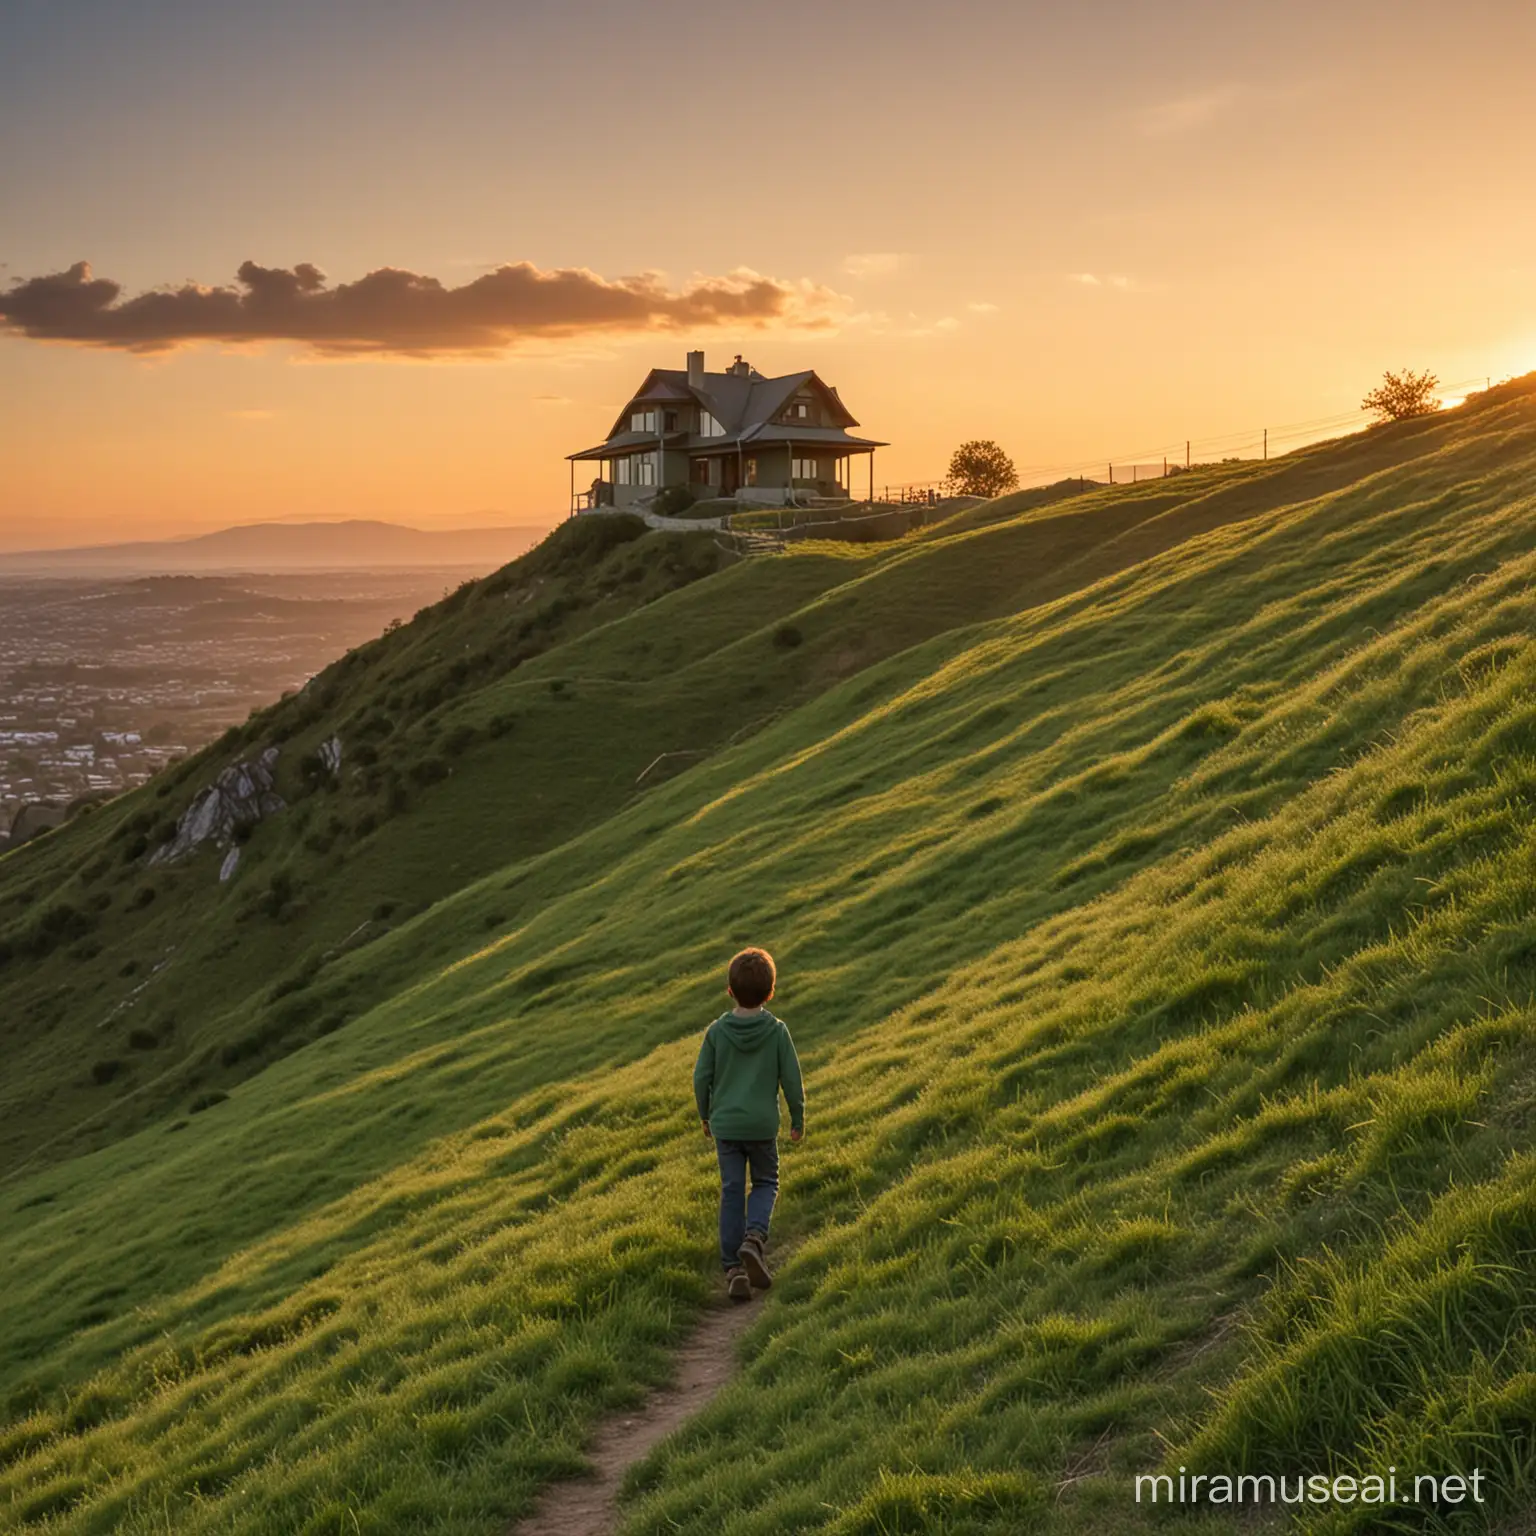 Young Boy Walking Towards Hilltop House at Sunset